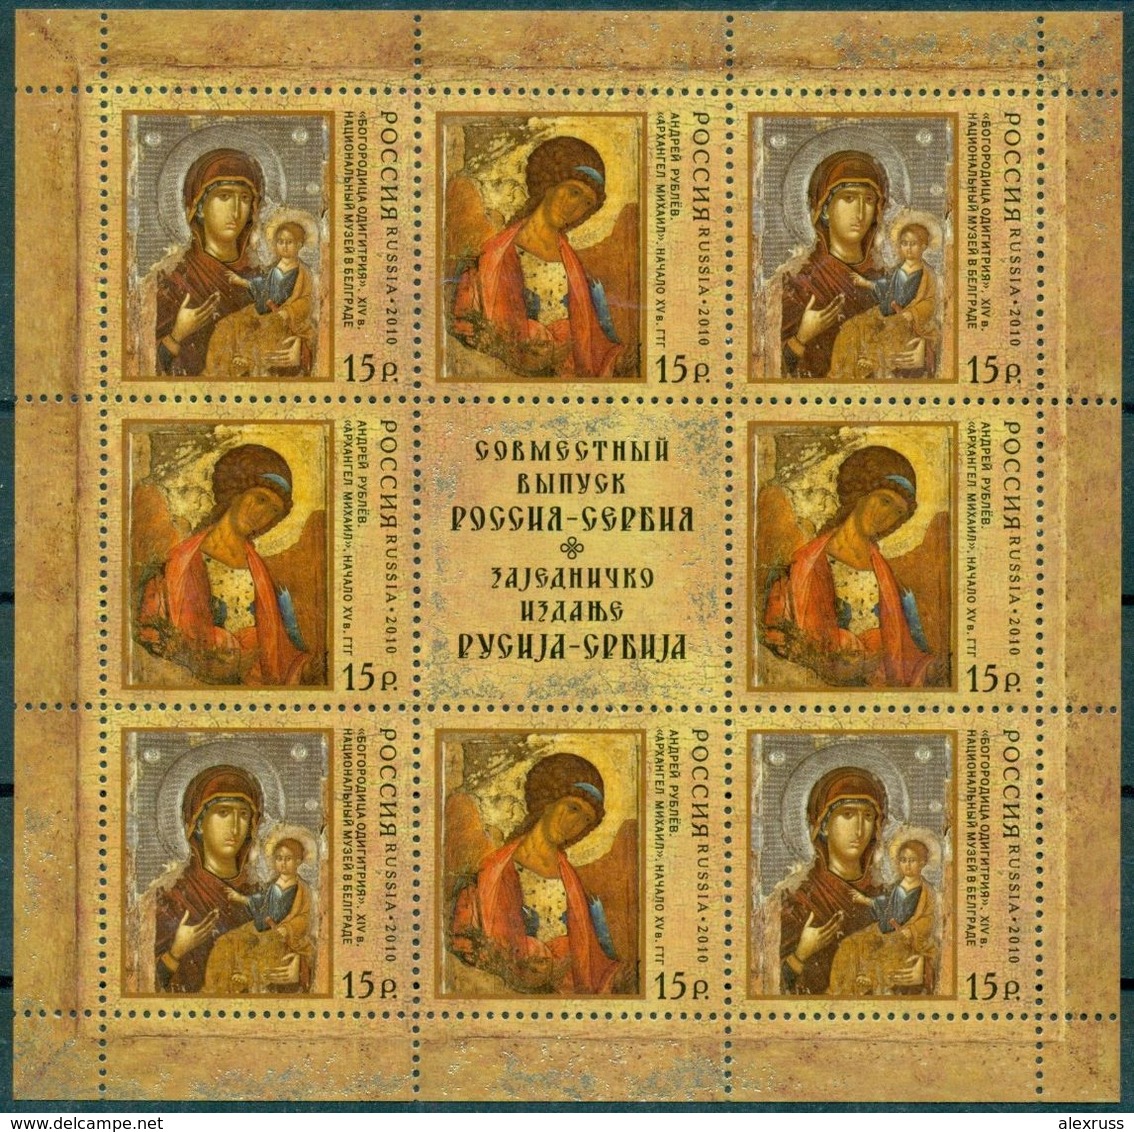 Russia 2010,Miniature Sheet Join Issue W/Serbia,Art Religious Icons Of Russia & Serbia,Scott # 7221,VF MNH** (OR-3) - Nuovi